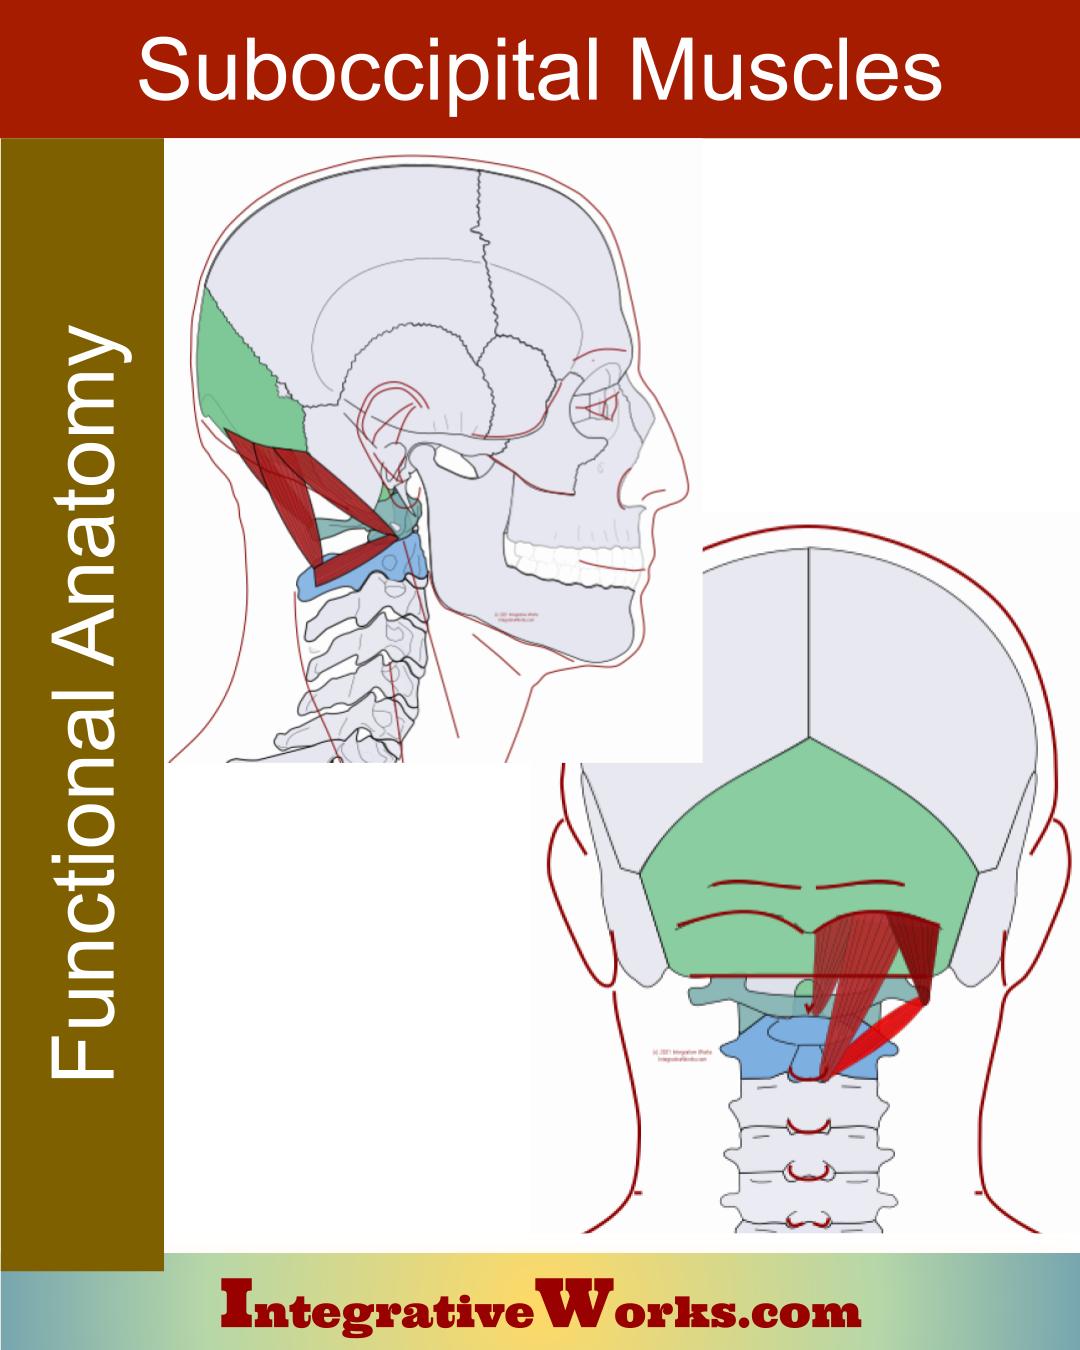 Suboccipital Muscles Functional Anatomy Integrative Works 6934